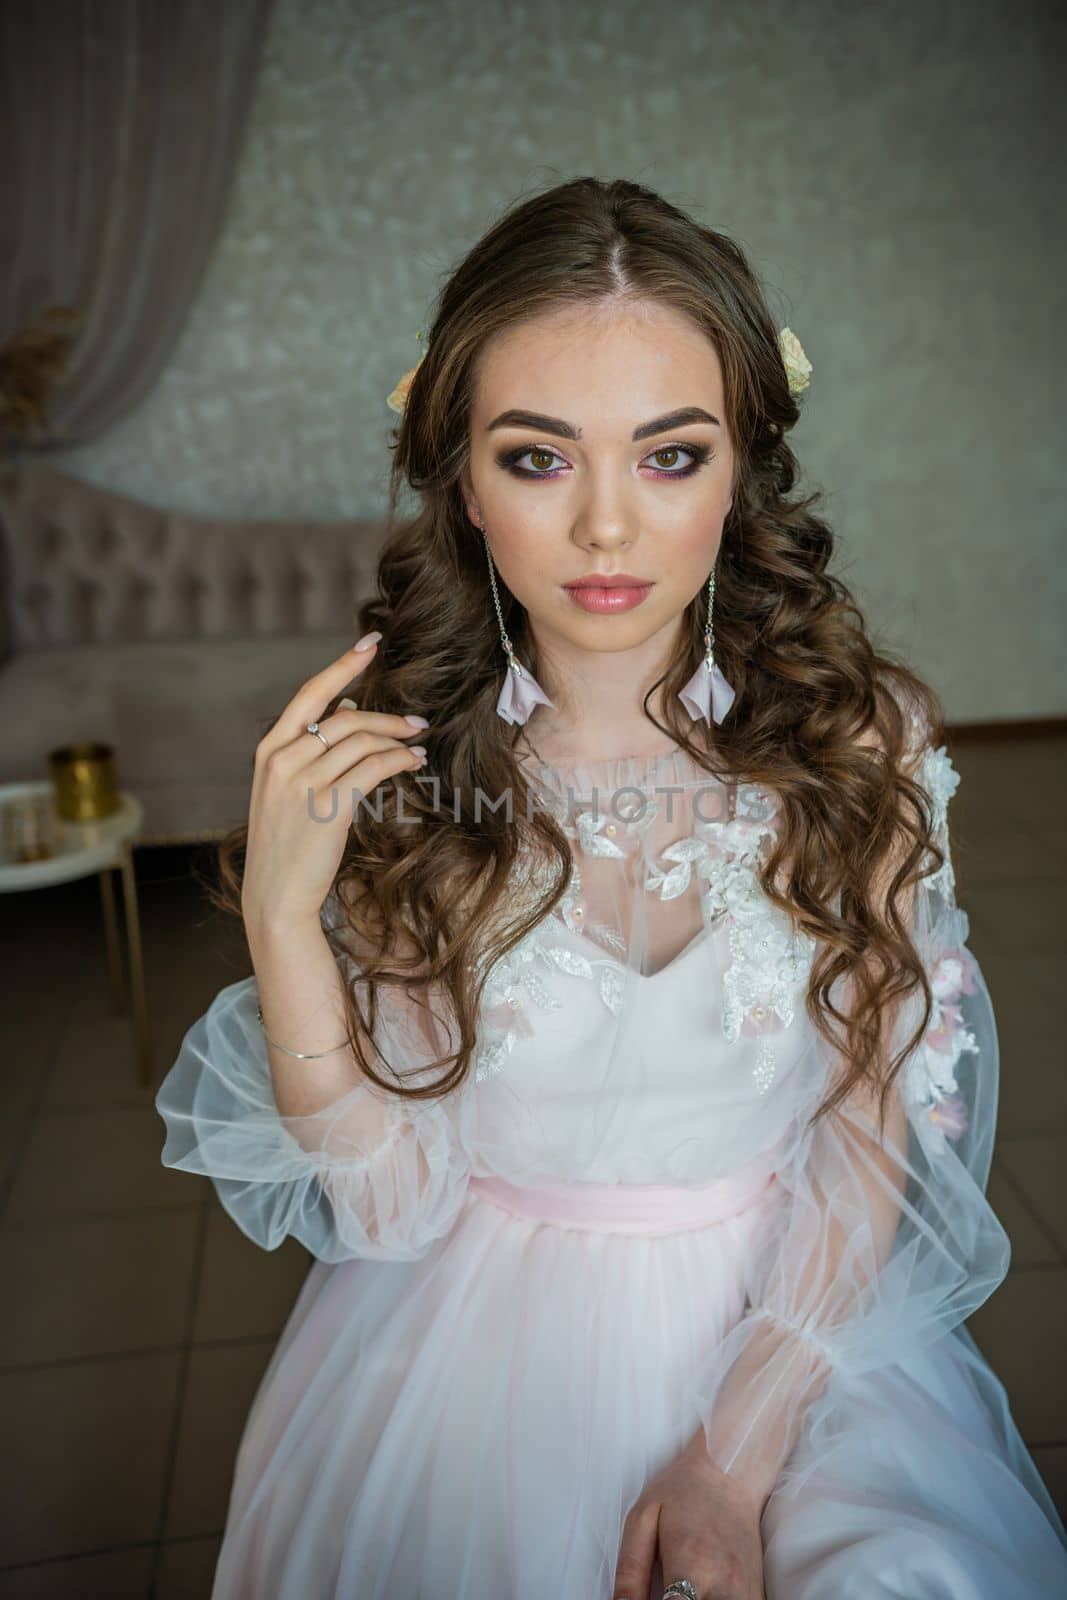 Beautiful makeup for a young bride girl